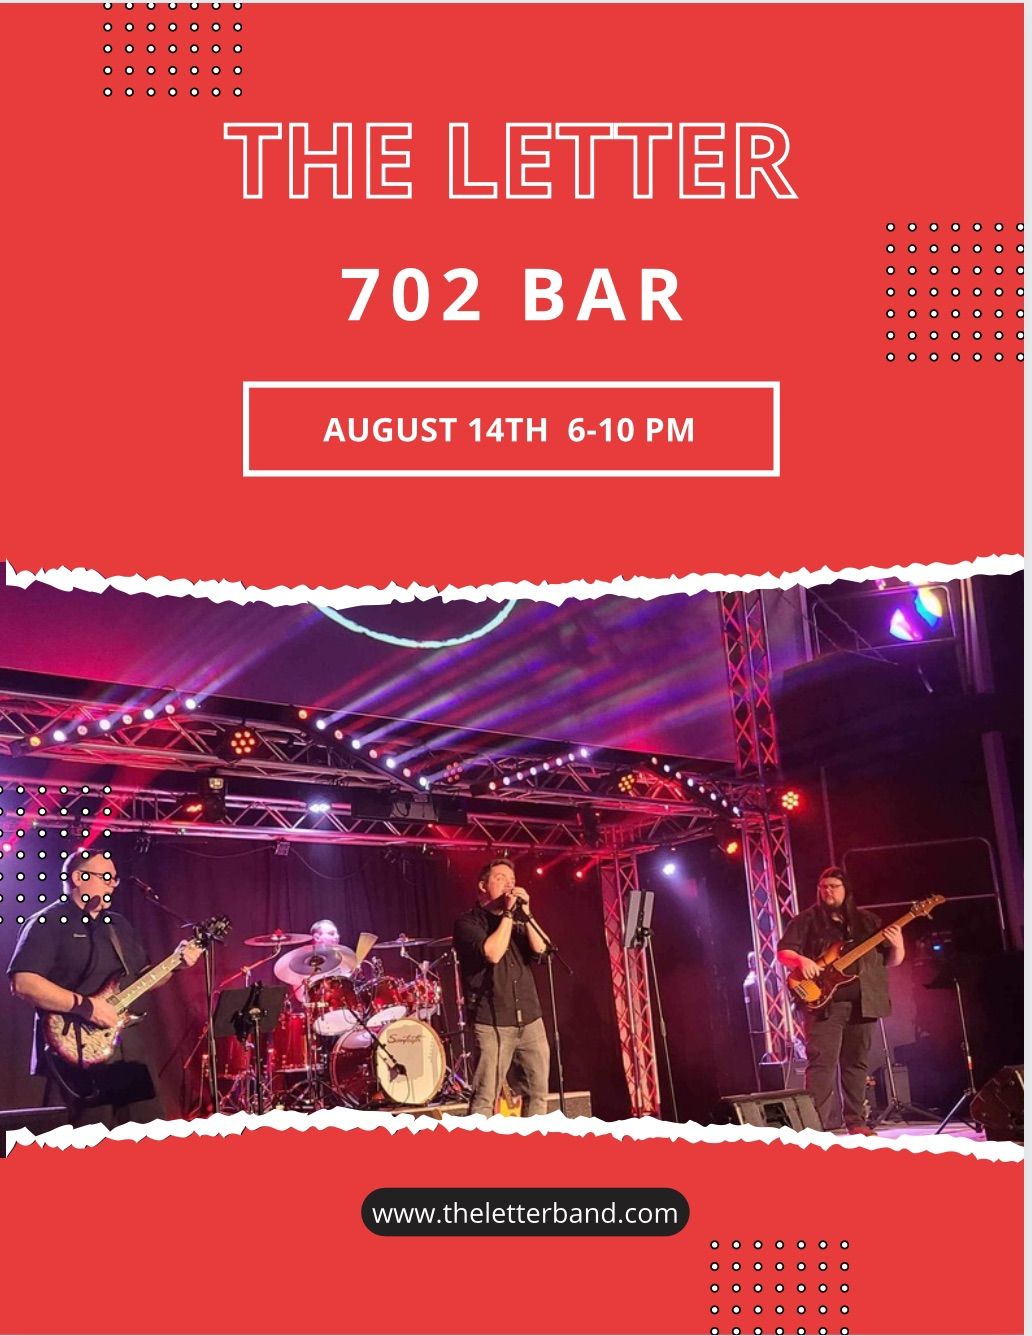 The Letter Rocks Out 702 Bar 